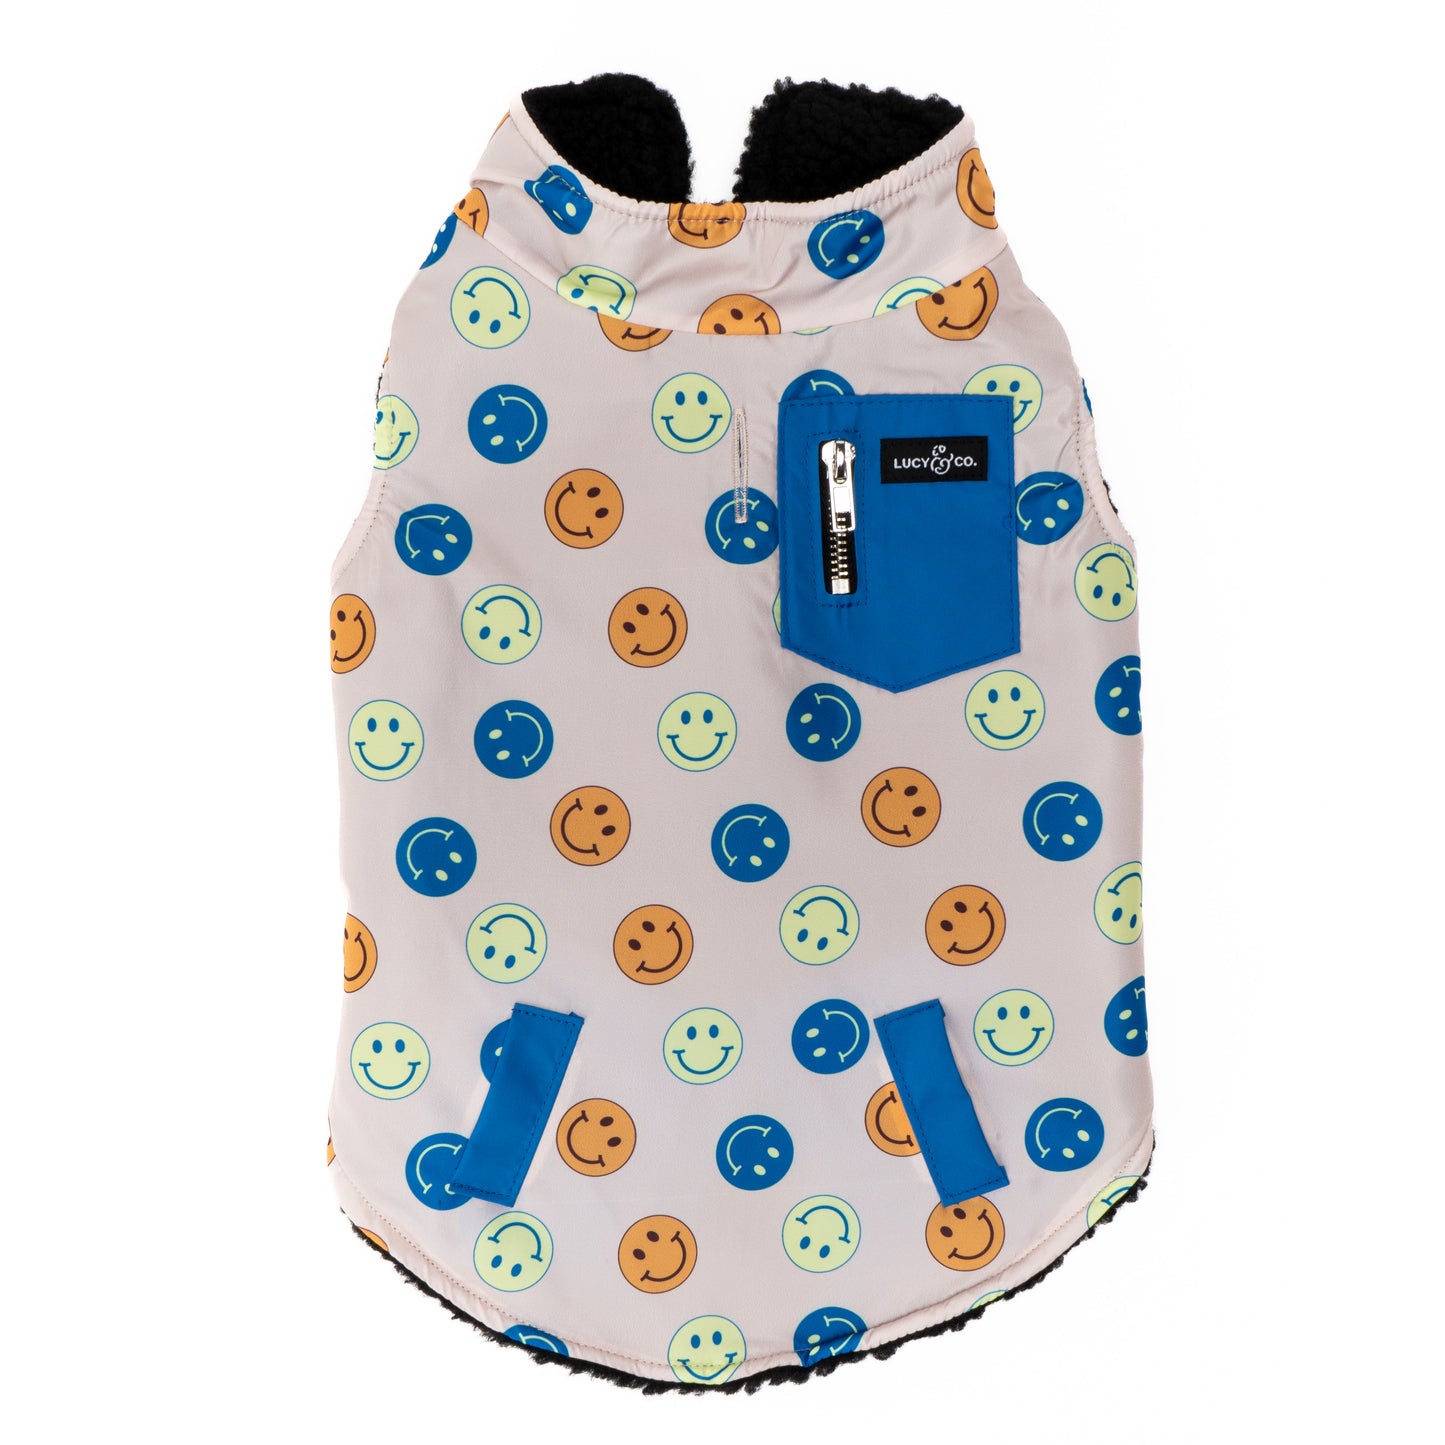 The Have a Nice Day Reversible Teddy Vest